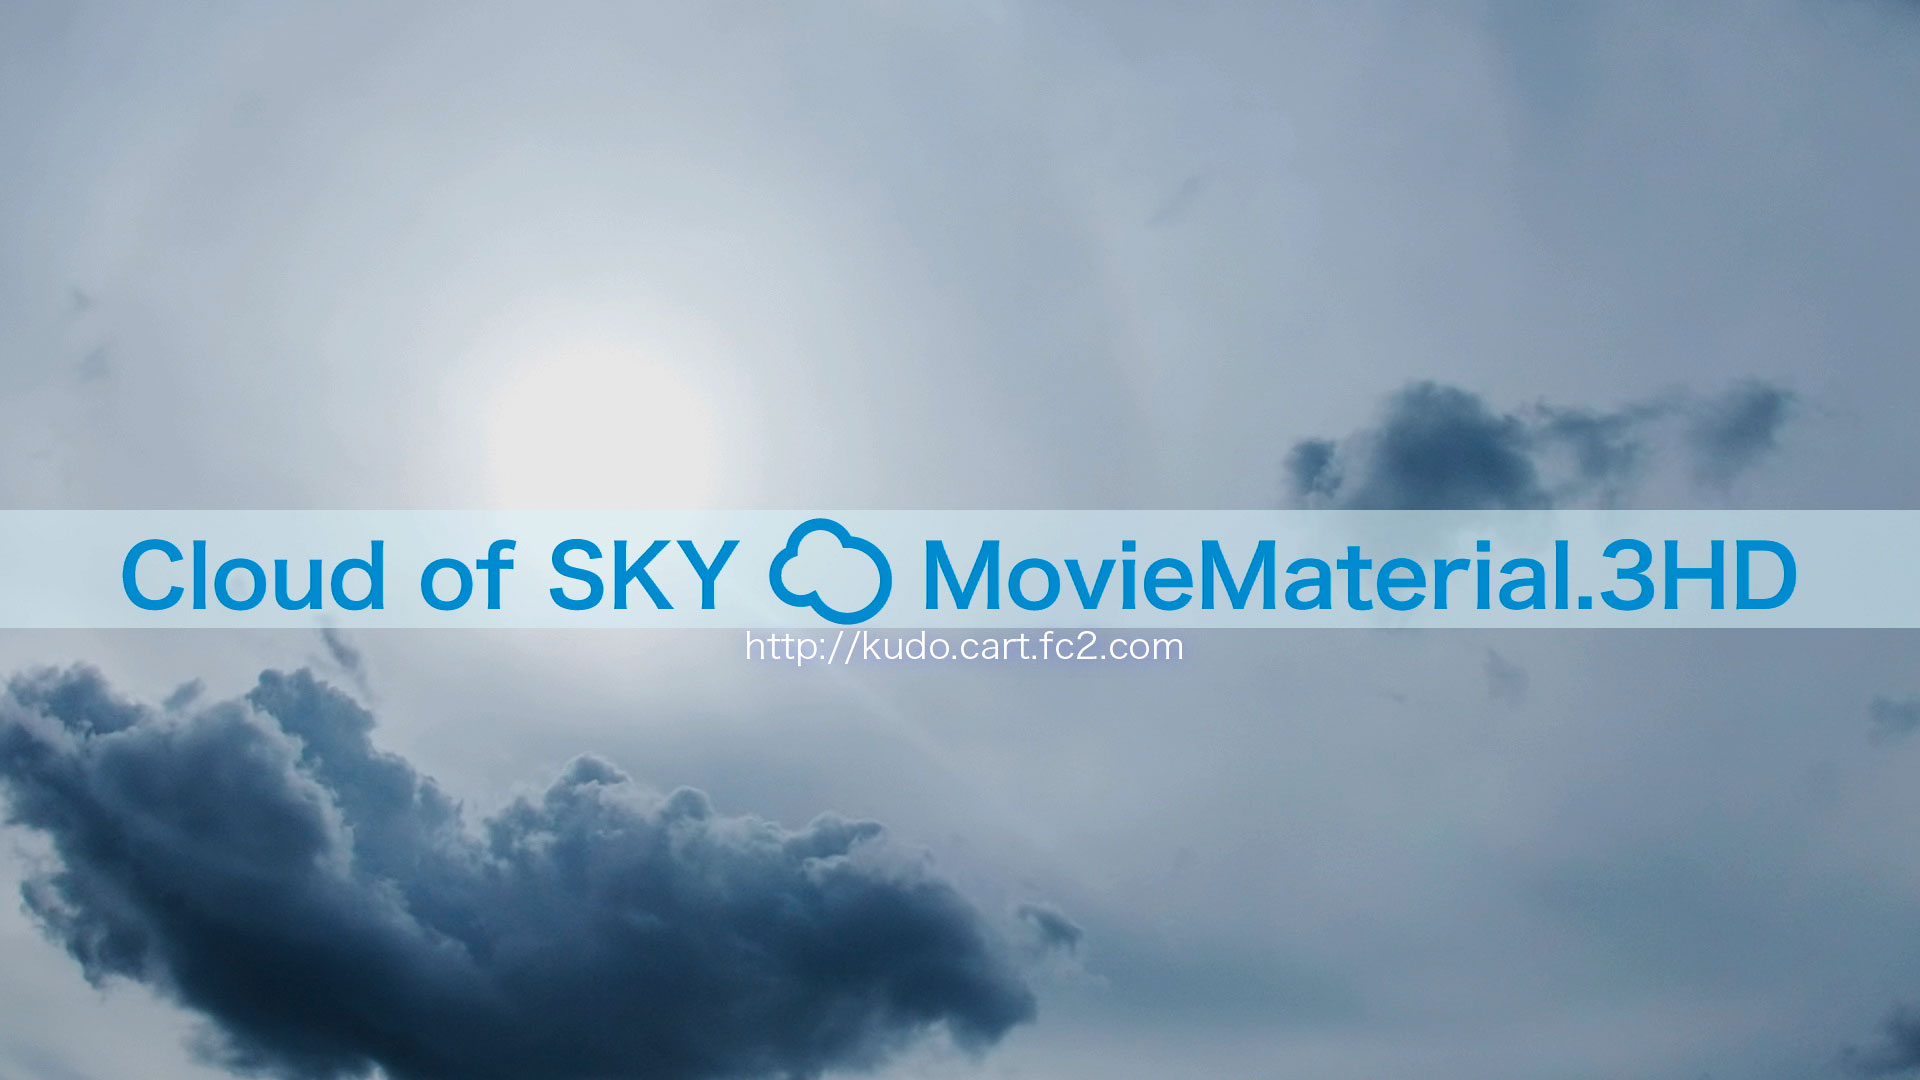 【Cloud of SKY MovieMaterial.HDSET】 ロイヤリティフリー フルハイビジョン動画素材集 Image.8